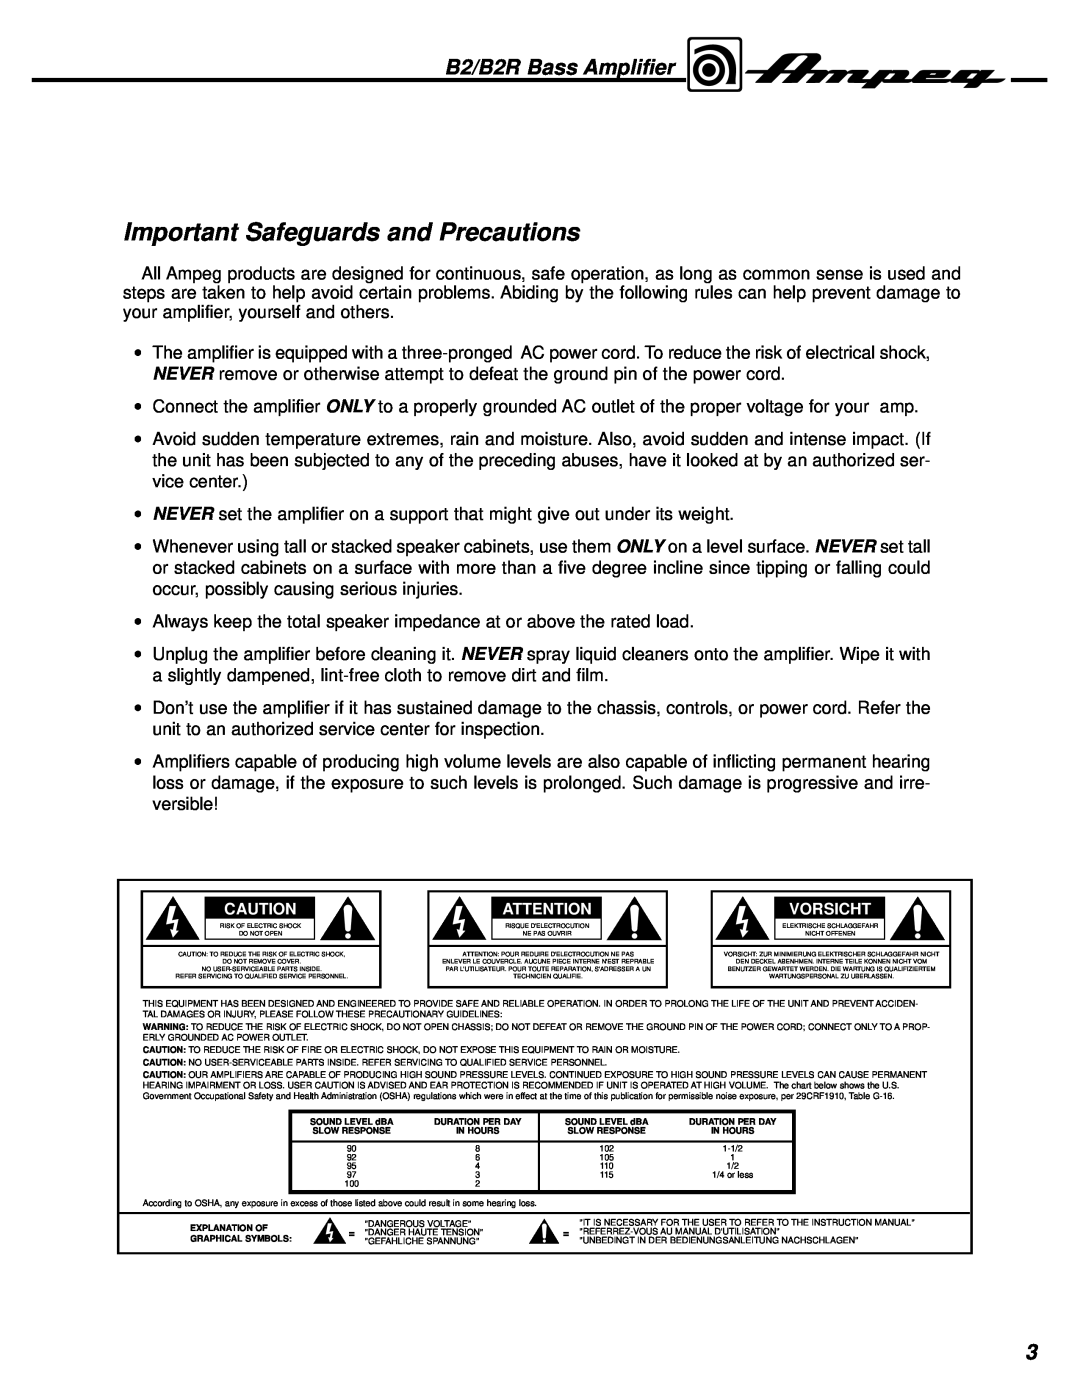 Ampeg manual Important Safeguards and Precautions, B2/B2R Bass Amplifier 